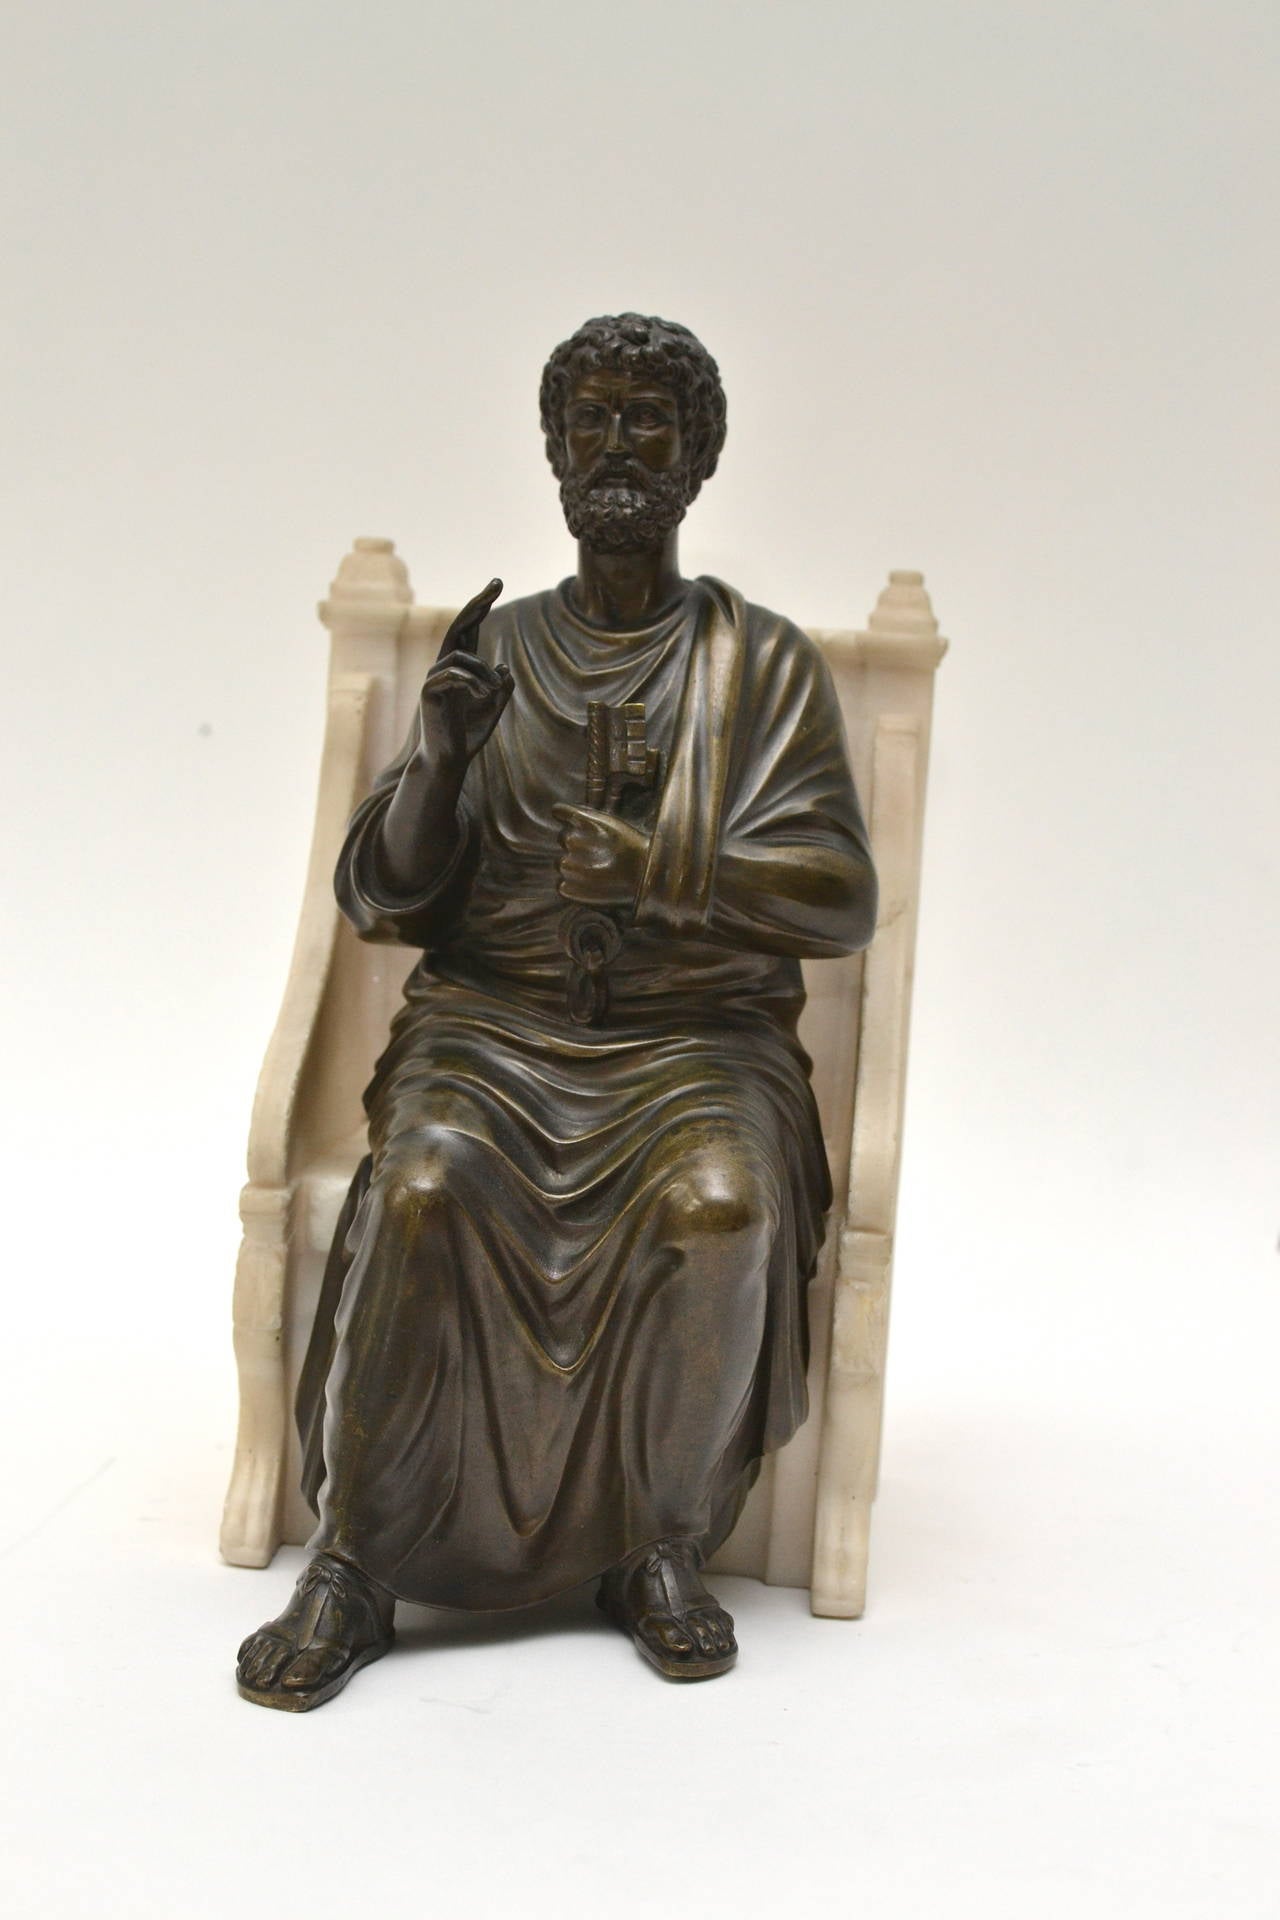 Italian Bronze Sculpture of St. Peter Seated on a Alabaster Throne Chair, 19th Century